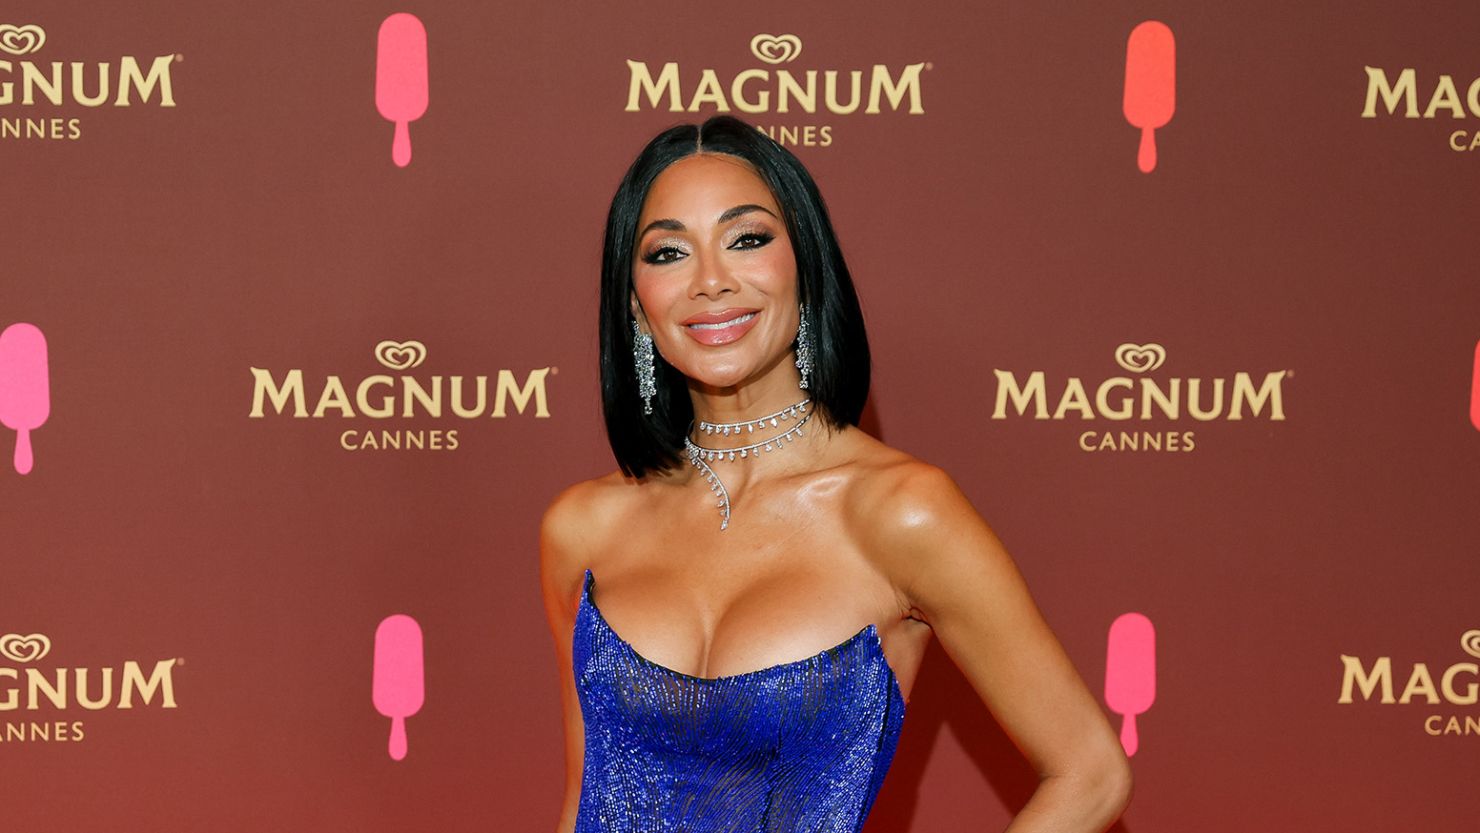 Nicole Scherzinger in May. The singer and "Masked Singer" panelist is newly engaged.